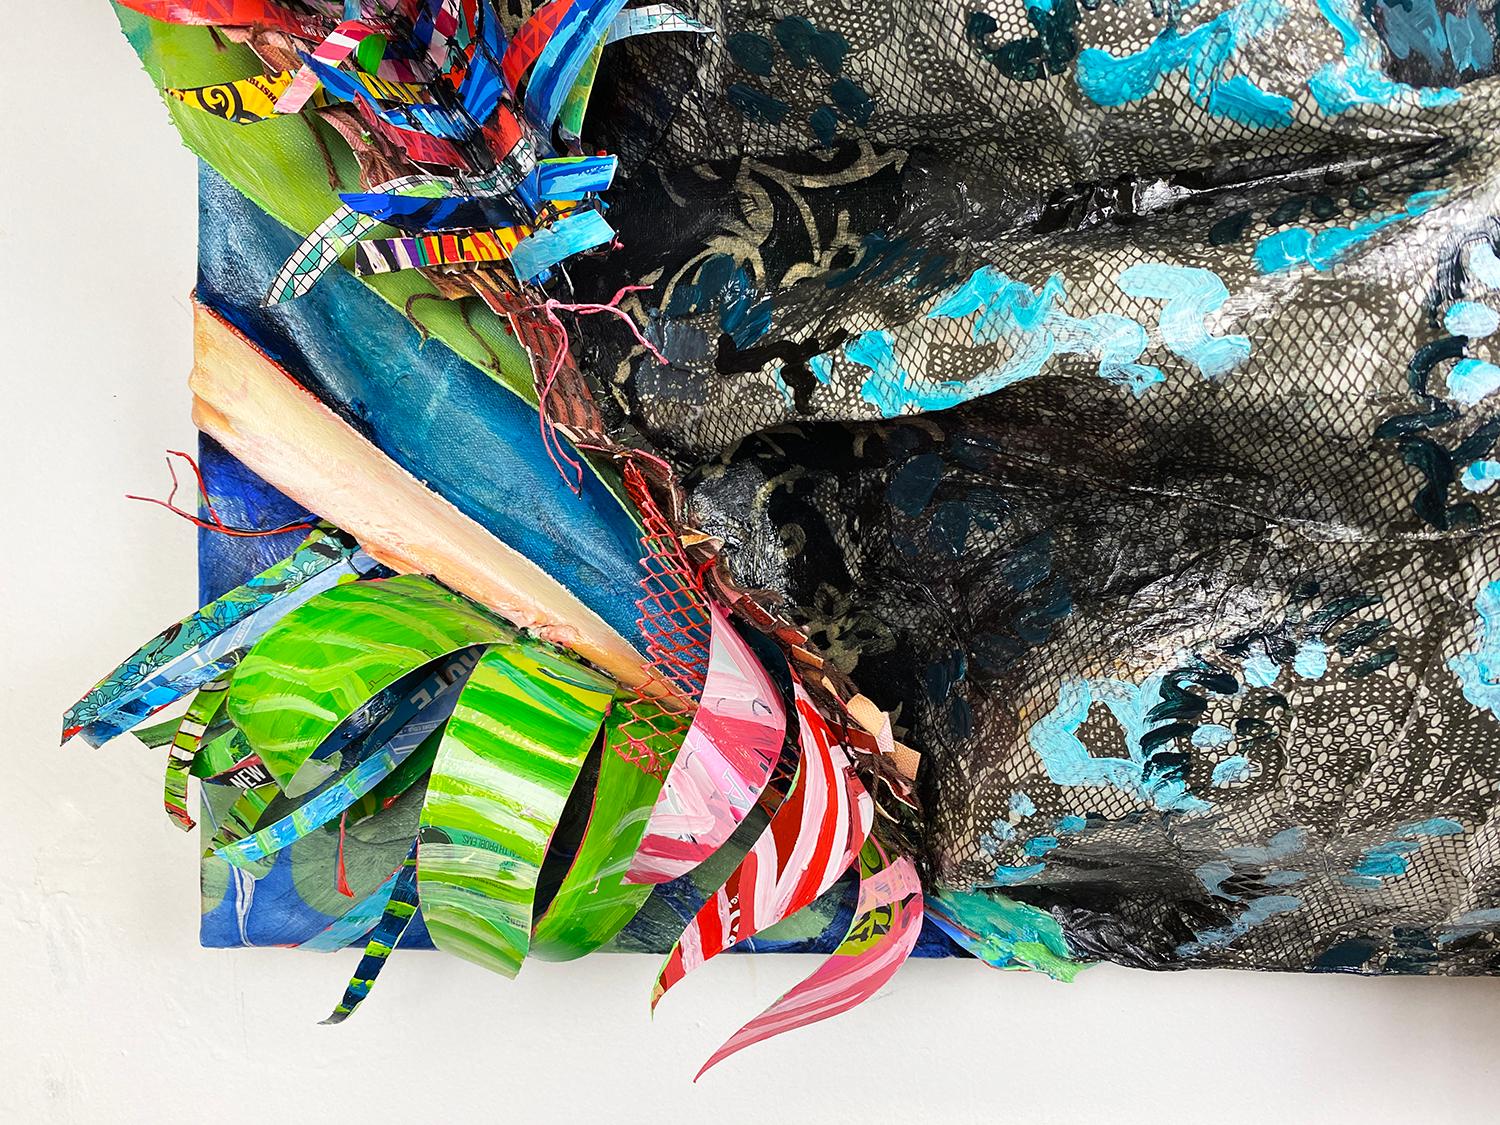 Sculpture meets painting and assemblage in these textural colorful abstract paintings by Brooklyn based artist Christina Massey. Painstakingly hand stitched and woven together, combining traditional materials such as canvas and acrylic paint with